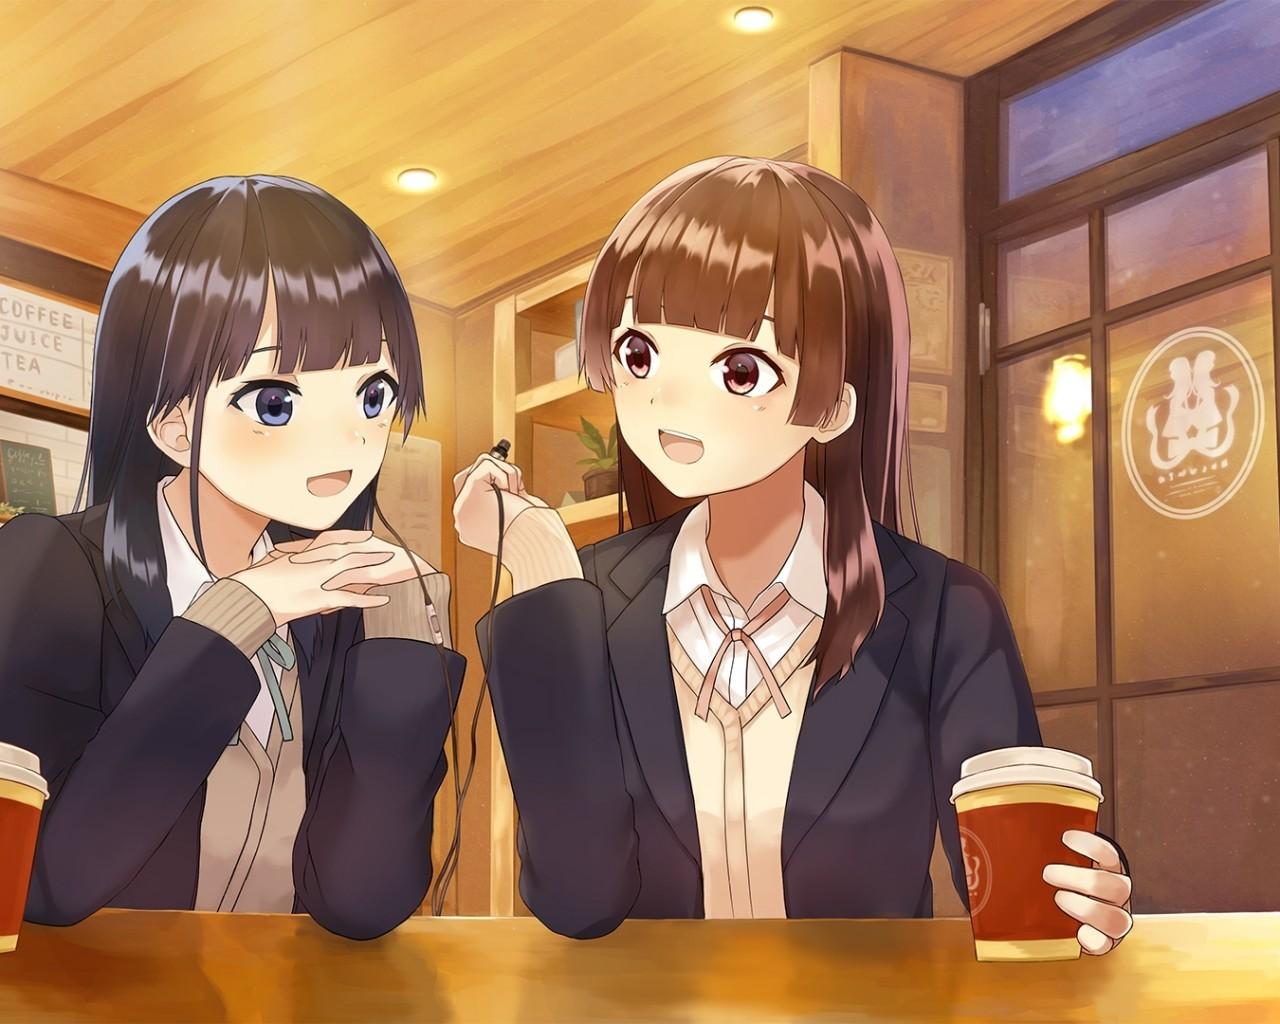 Download 1280x1024 Anime Girls, Coffee, Cafe, Friends, Drinks Wallpaper